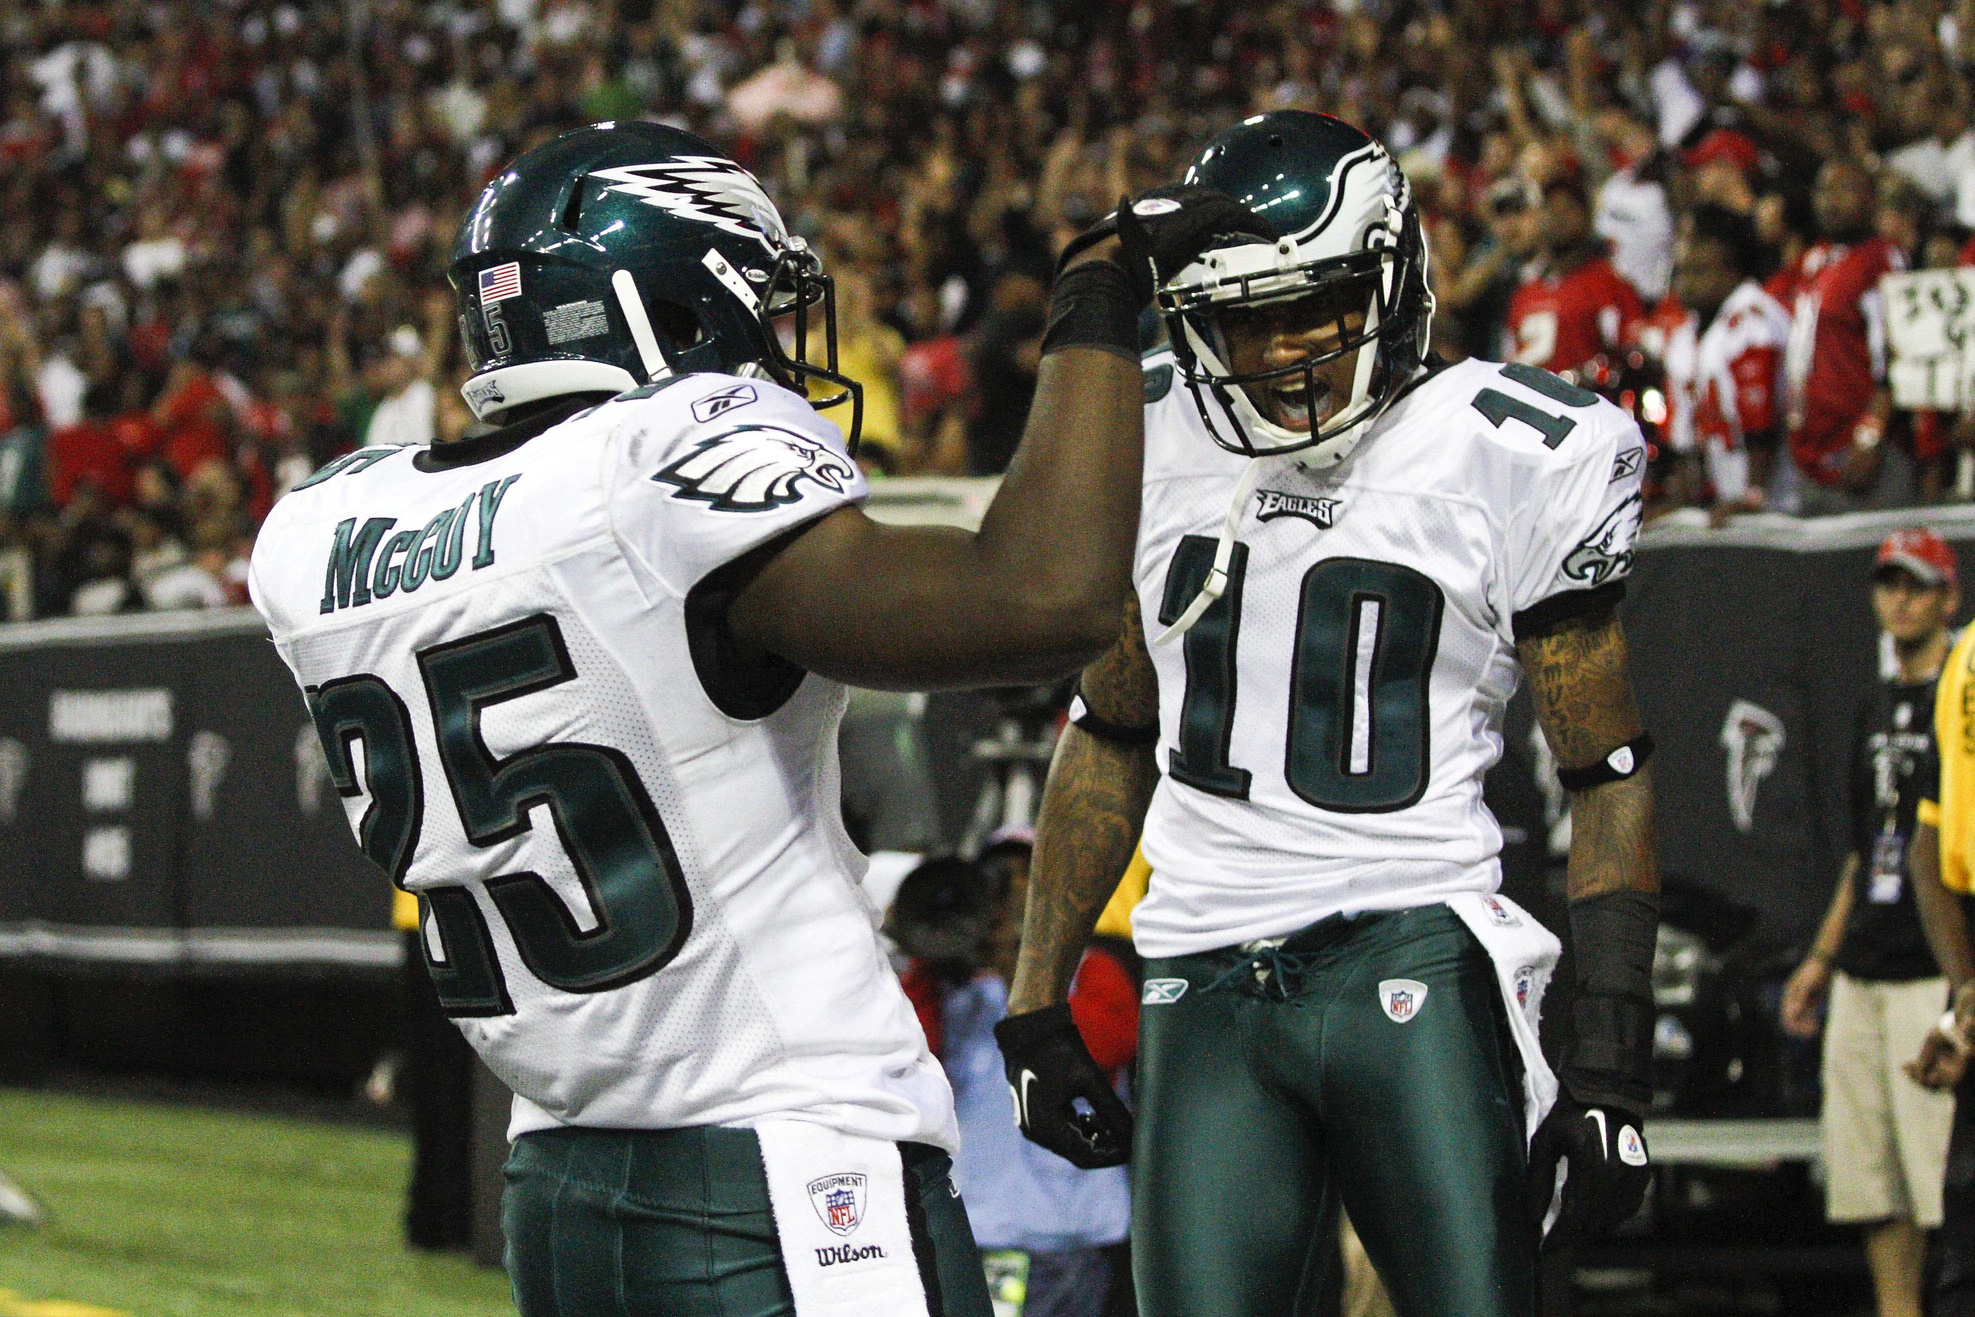 Philadelphia Eagles running back LeSean McCoy (25) celebrates with wide receiver DeSean Jackson (10) after scoring a touchdown against the Atlanta Falcons in the third quarter at the Georgia Dome. The Falcons beat the Eagles 35-31.